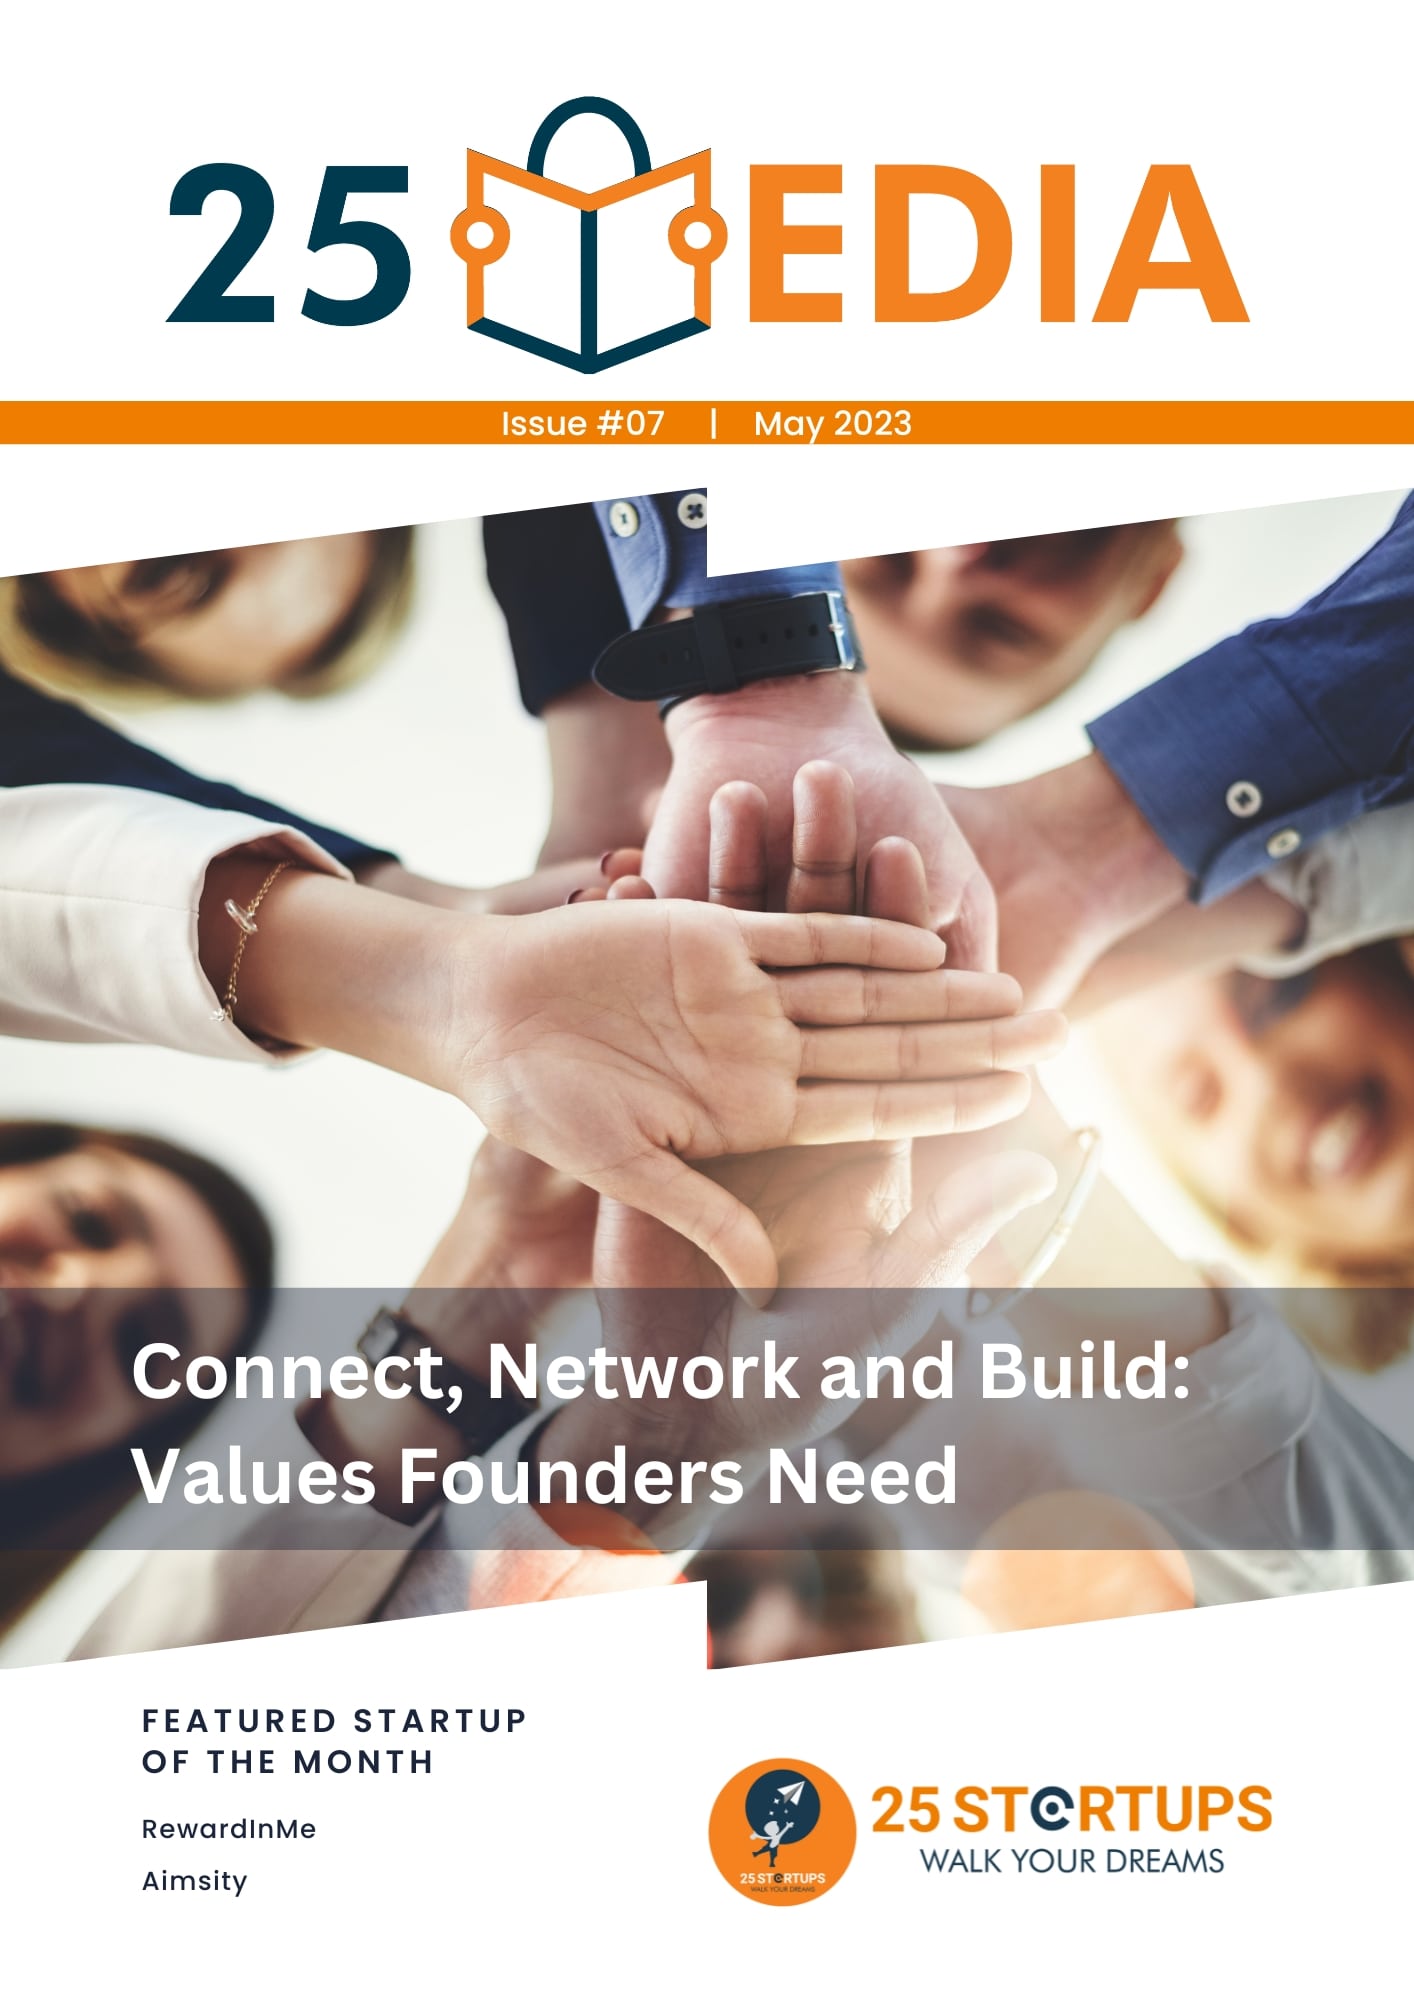 25 Media Issue #07: Connect, Network, Build: Values Founders Need